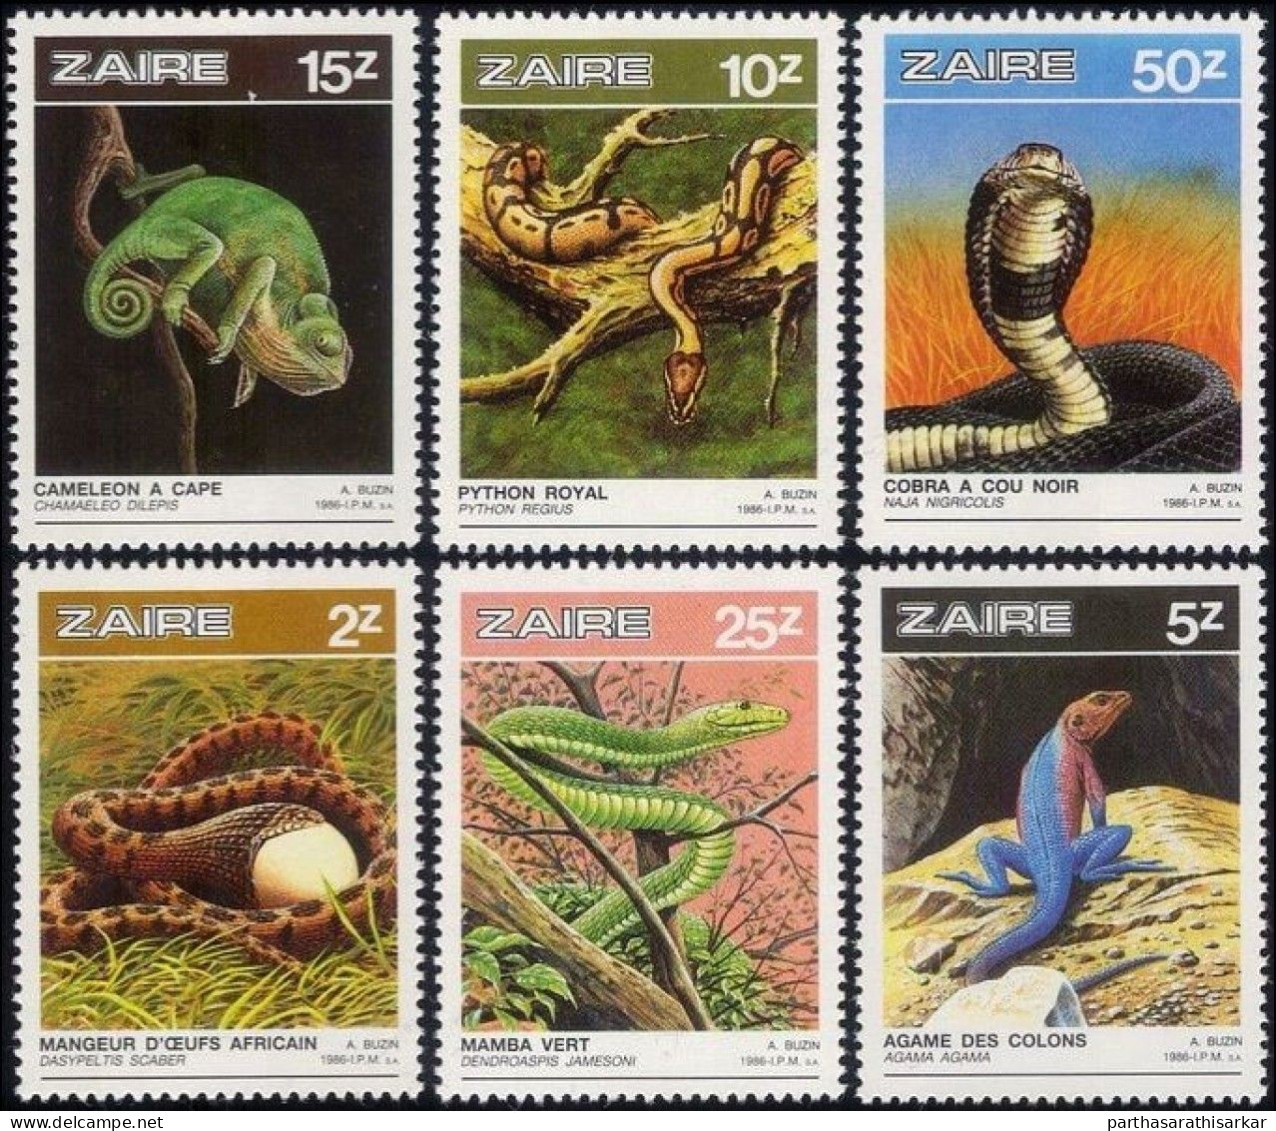 ZAIRE 1986 REPTILES SNAKES LIZARDS NATURE WILDLIFE COMPLETE SET MNH - Snakes